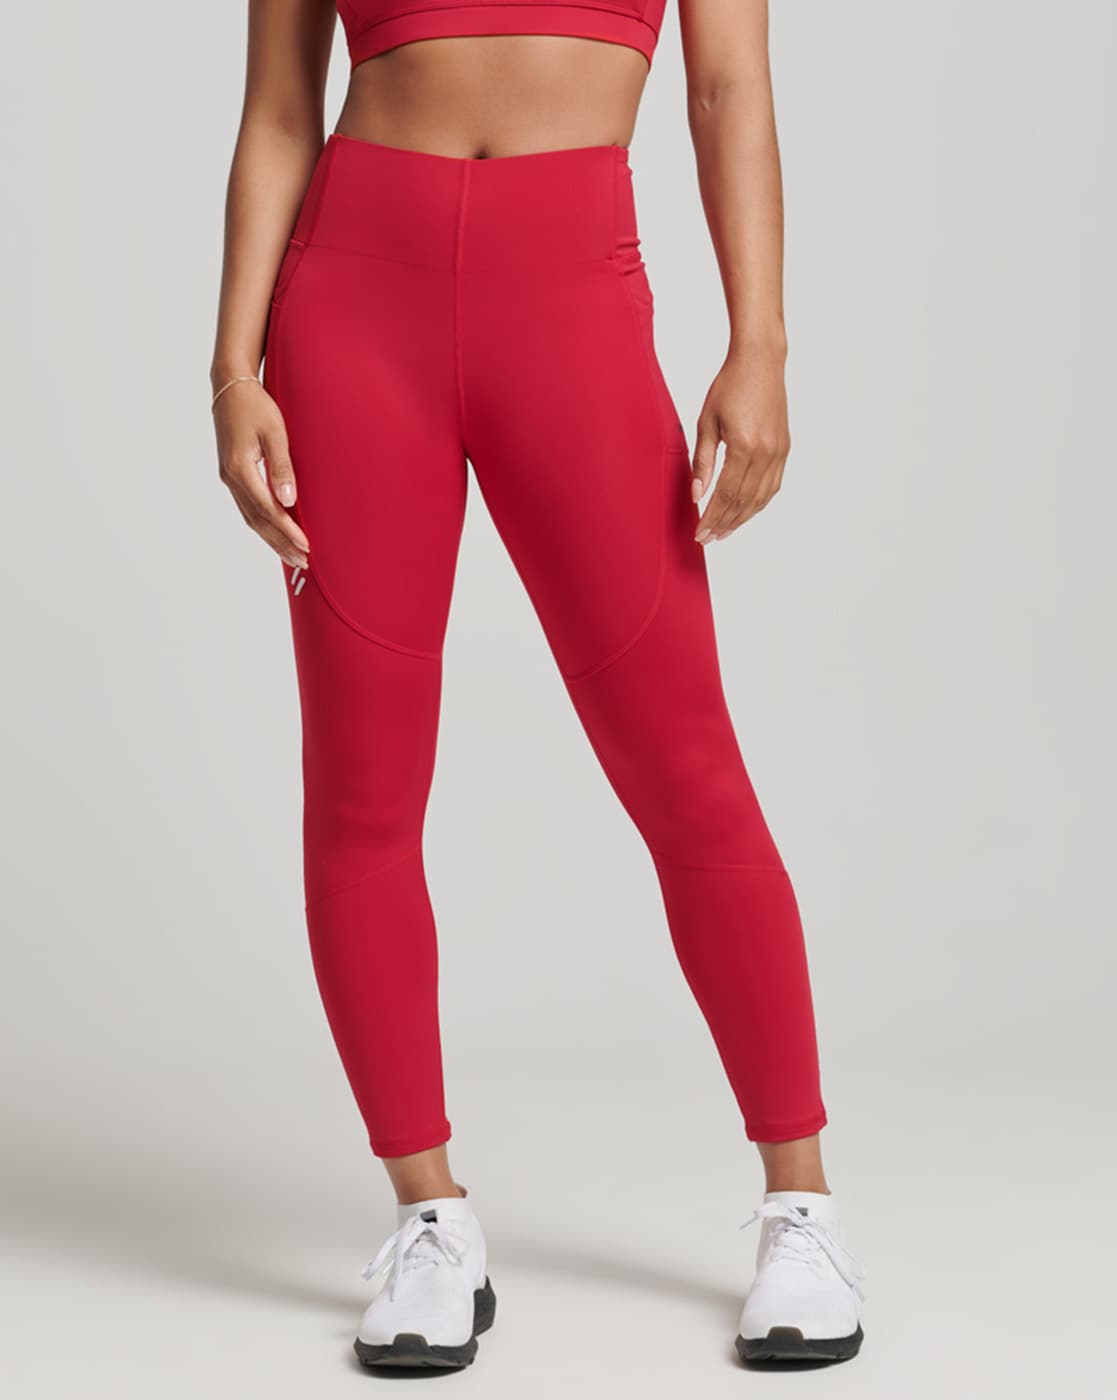 NWT Women's Nike One Red Tights Yoga Pants 7/8 Length Size Small MSRP $55